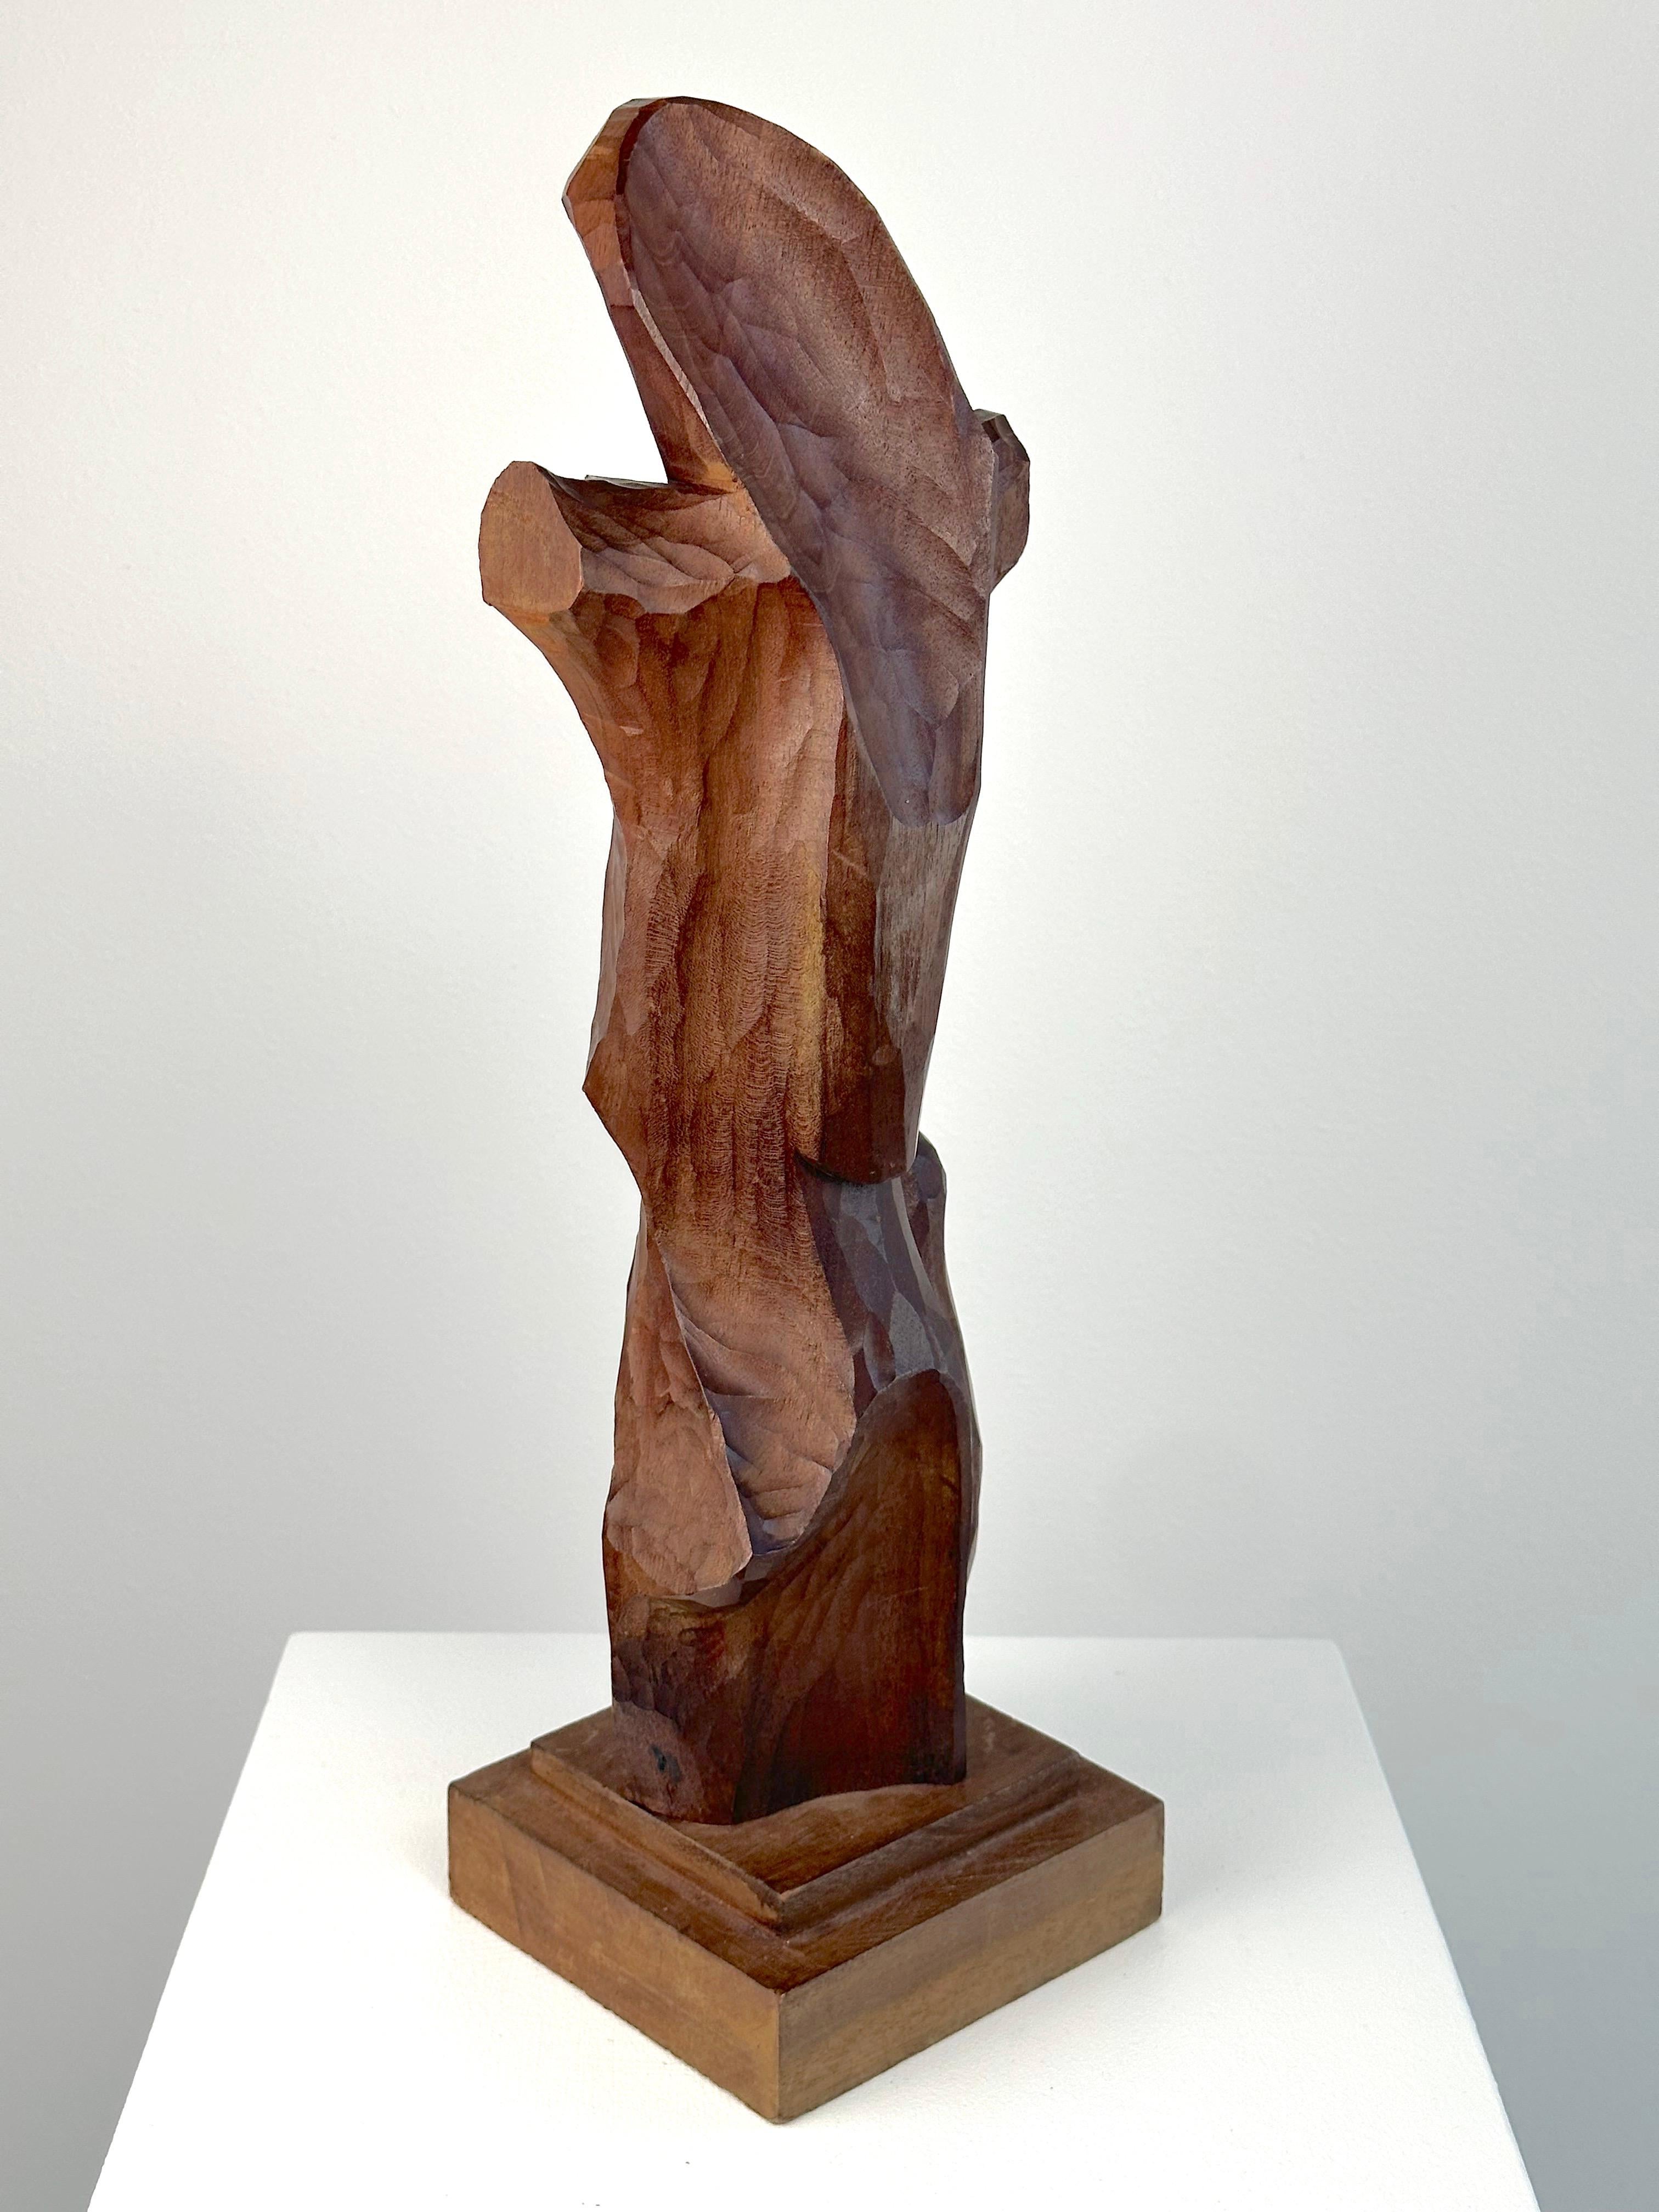 Raul Diaz (Argentina, b.1950). Abstract Figure, ca. 1970s. Canved Walnut. Measures 17 inches tall including wood base. Carved signature in lower region. Excellent condition. 

An early example of the artist's abstract figurative work. 

Raul Diaz's